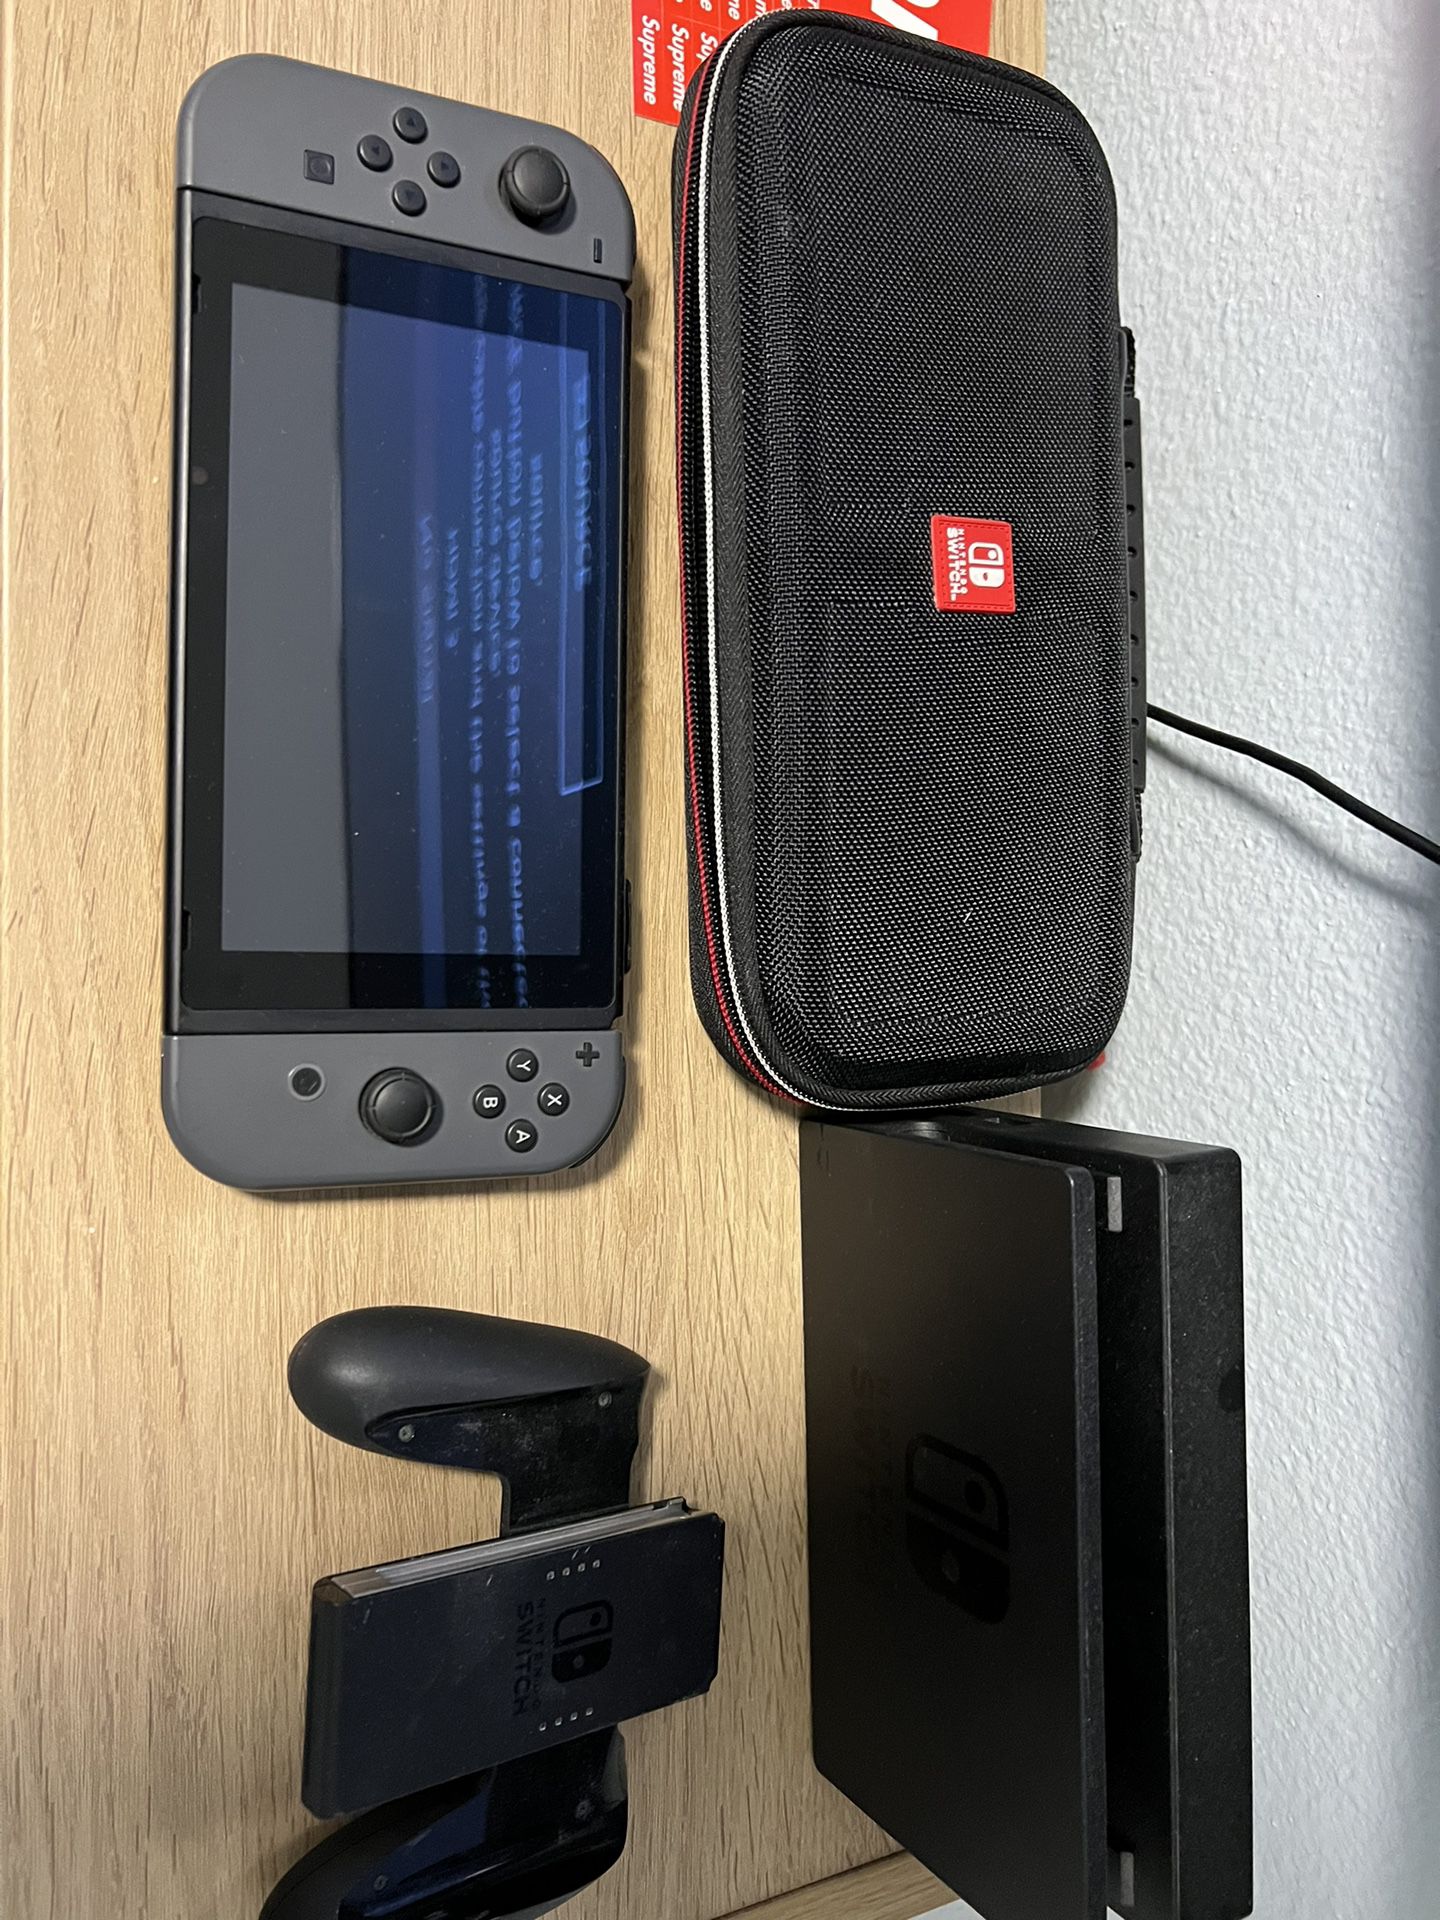 Nintendo Switch Excellent Condition + Accessories